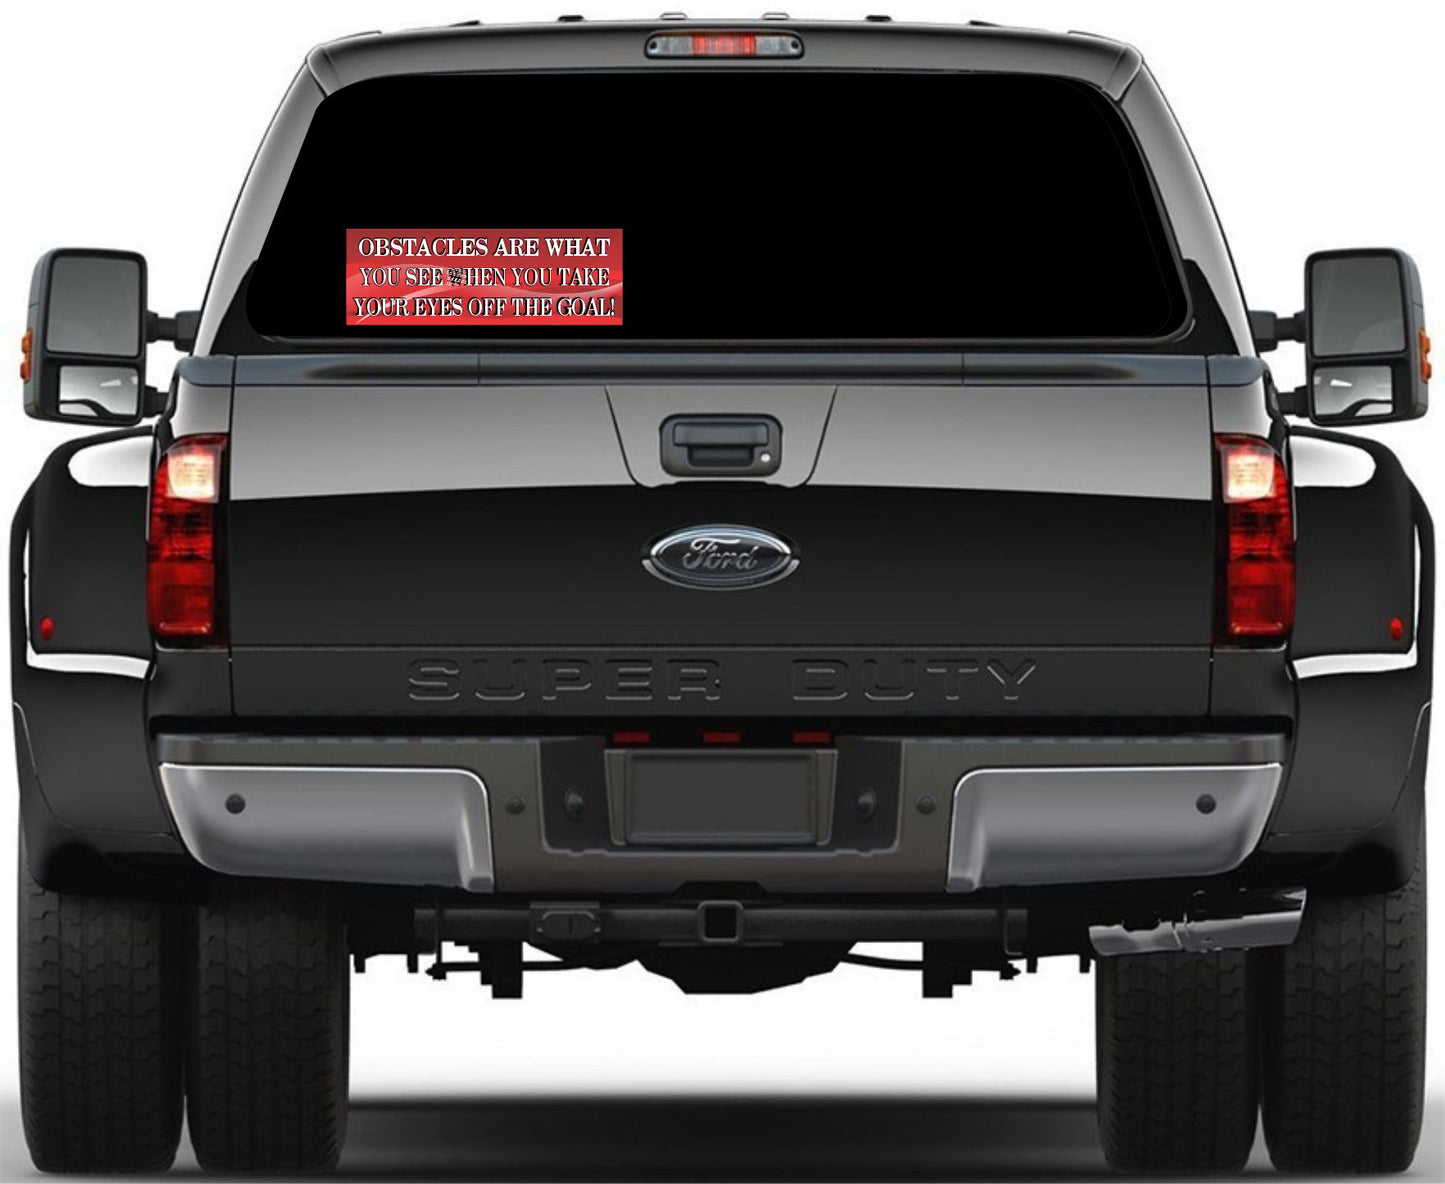 Obstacles are what you see Bumper sticker/magnet